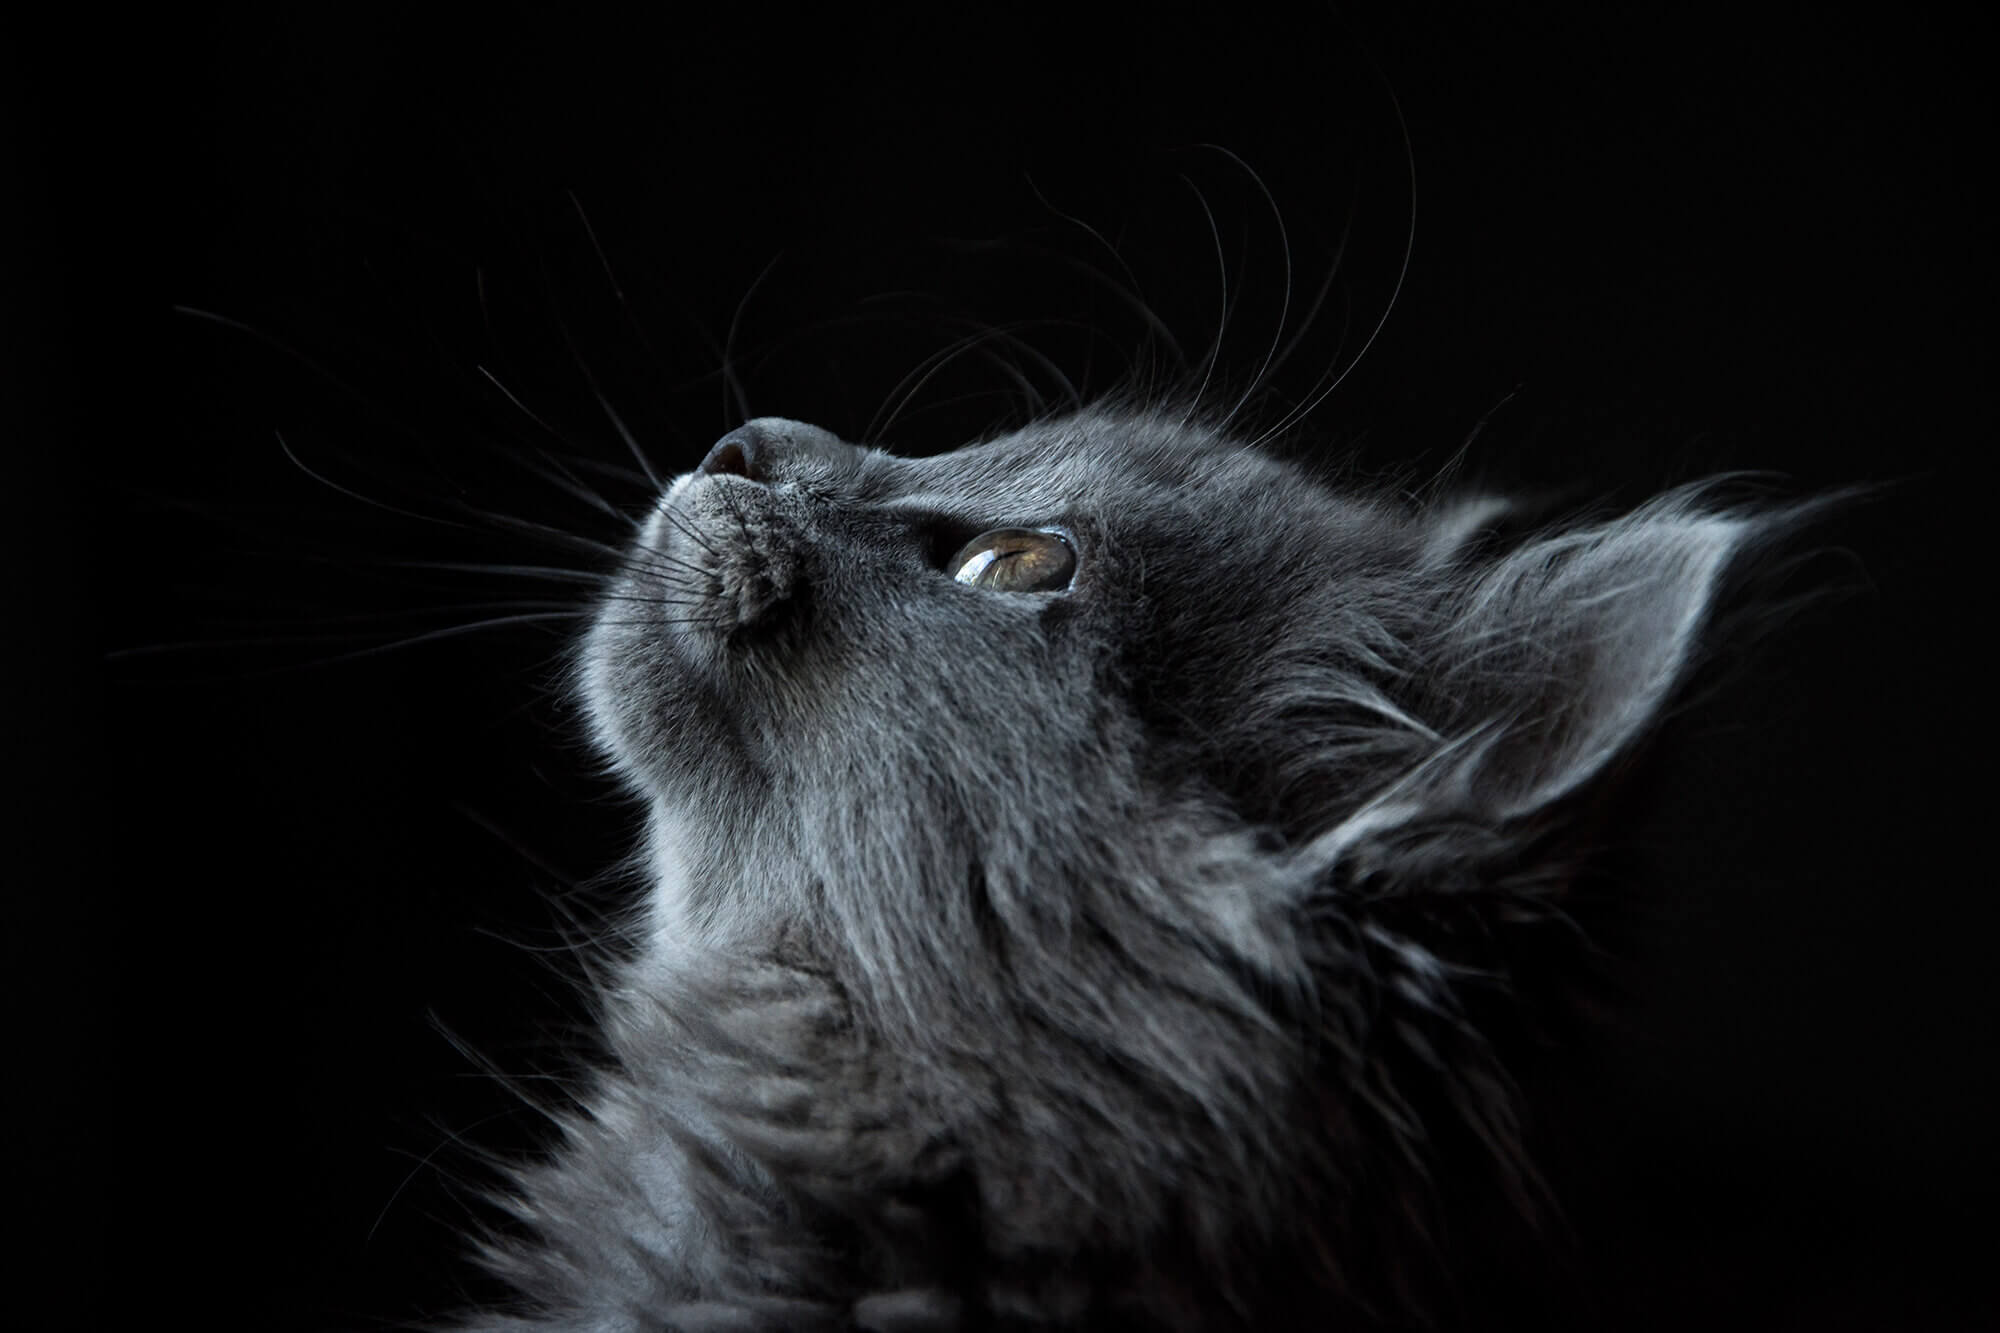 This example flips an image of a cat in the dark horizontally and changes the direction of its stare from right to left. (Source: Pexels.)